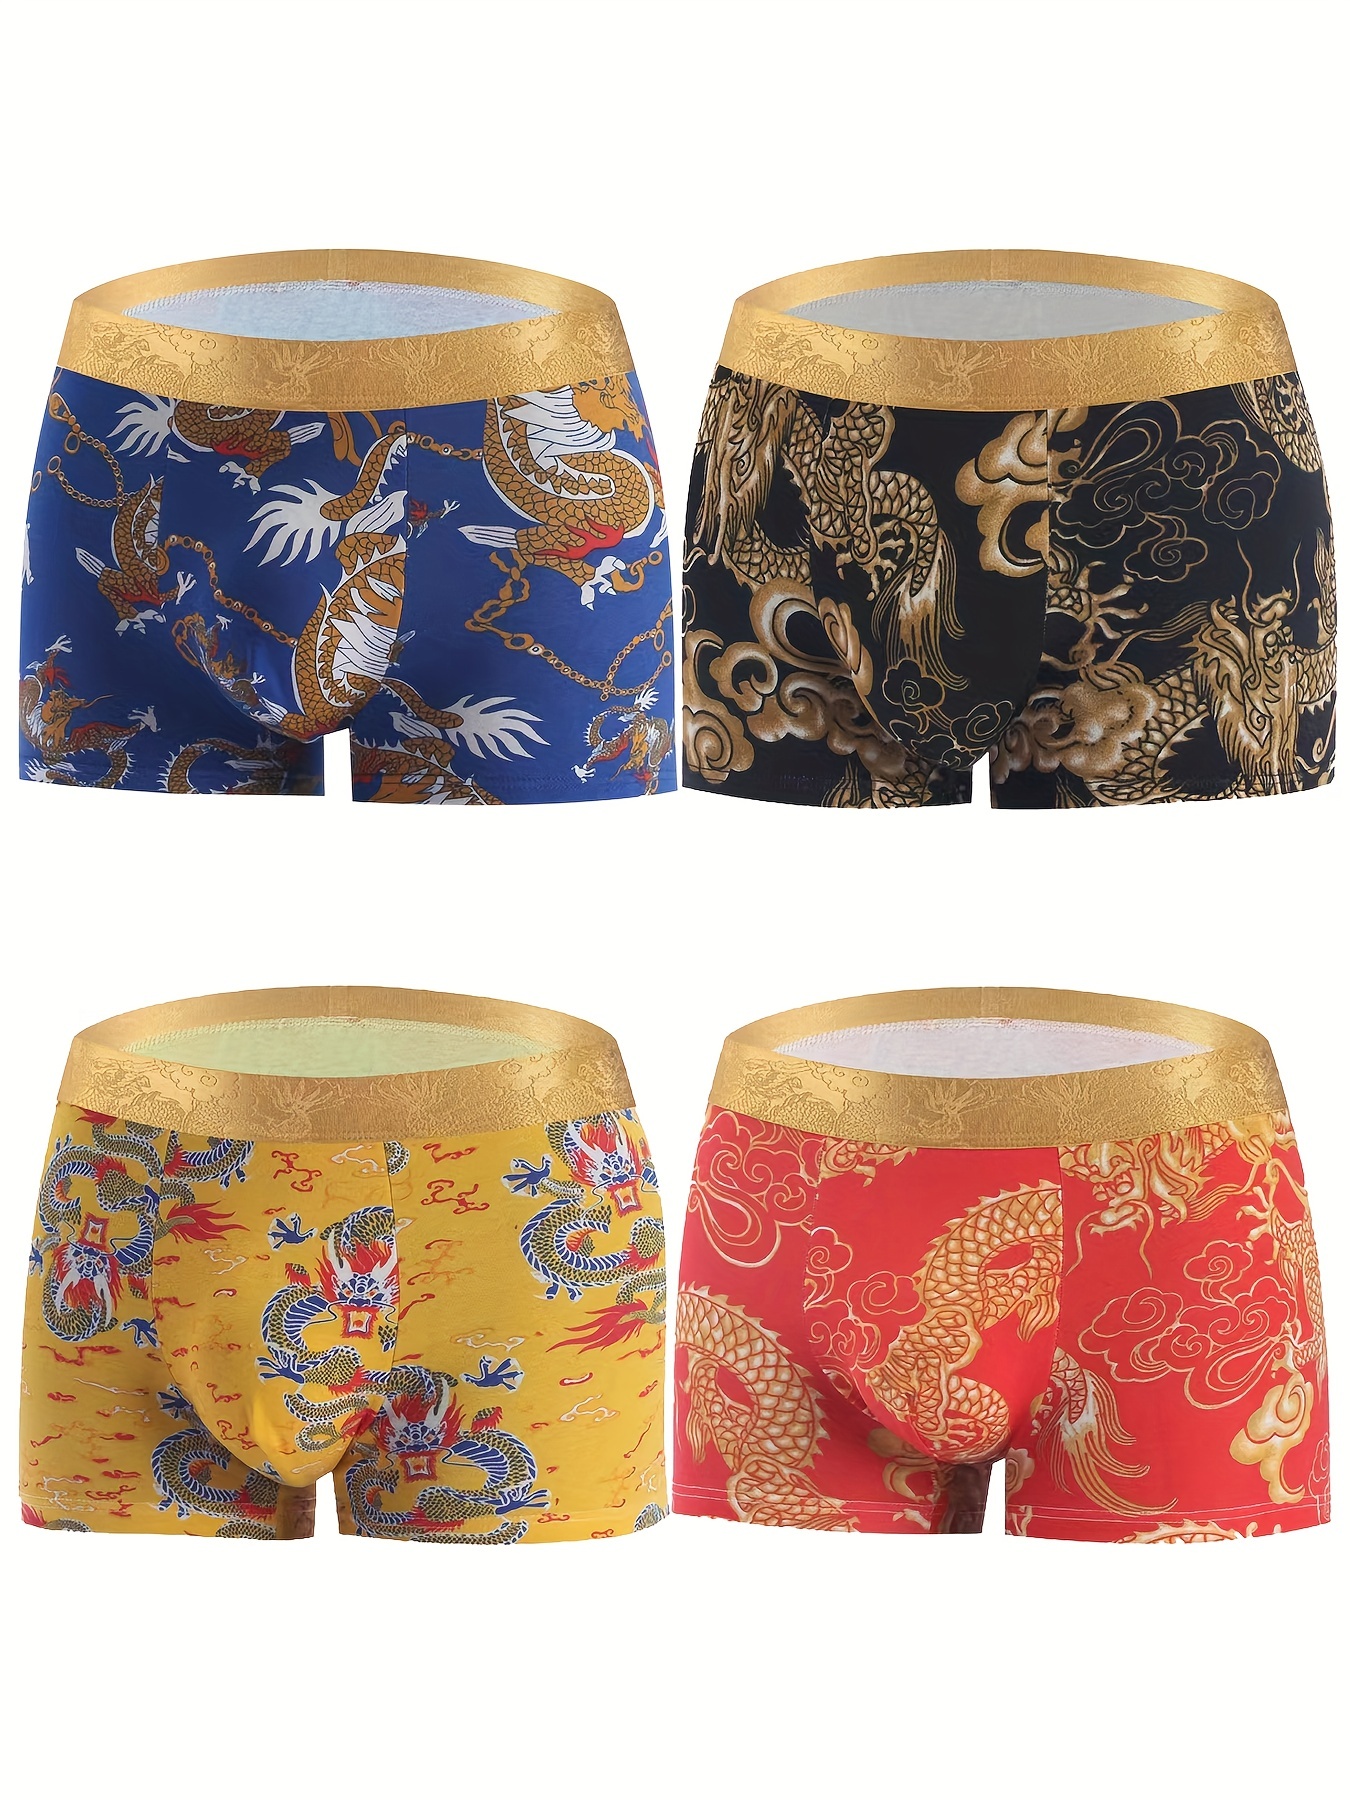 Year of the rooster 3D Men's boxer briefs Cool underpants New Year